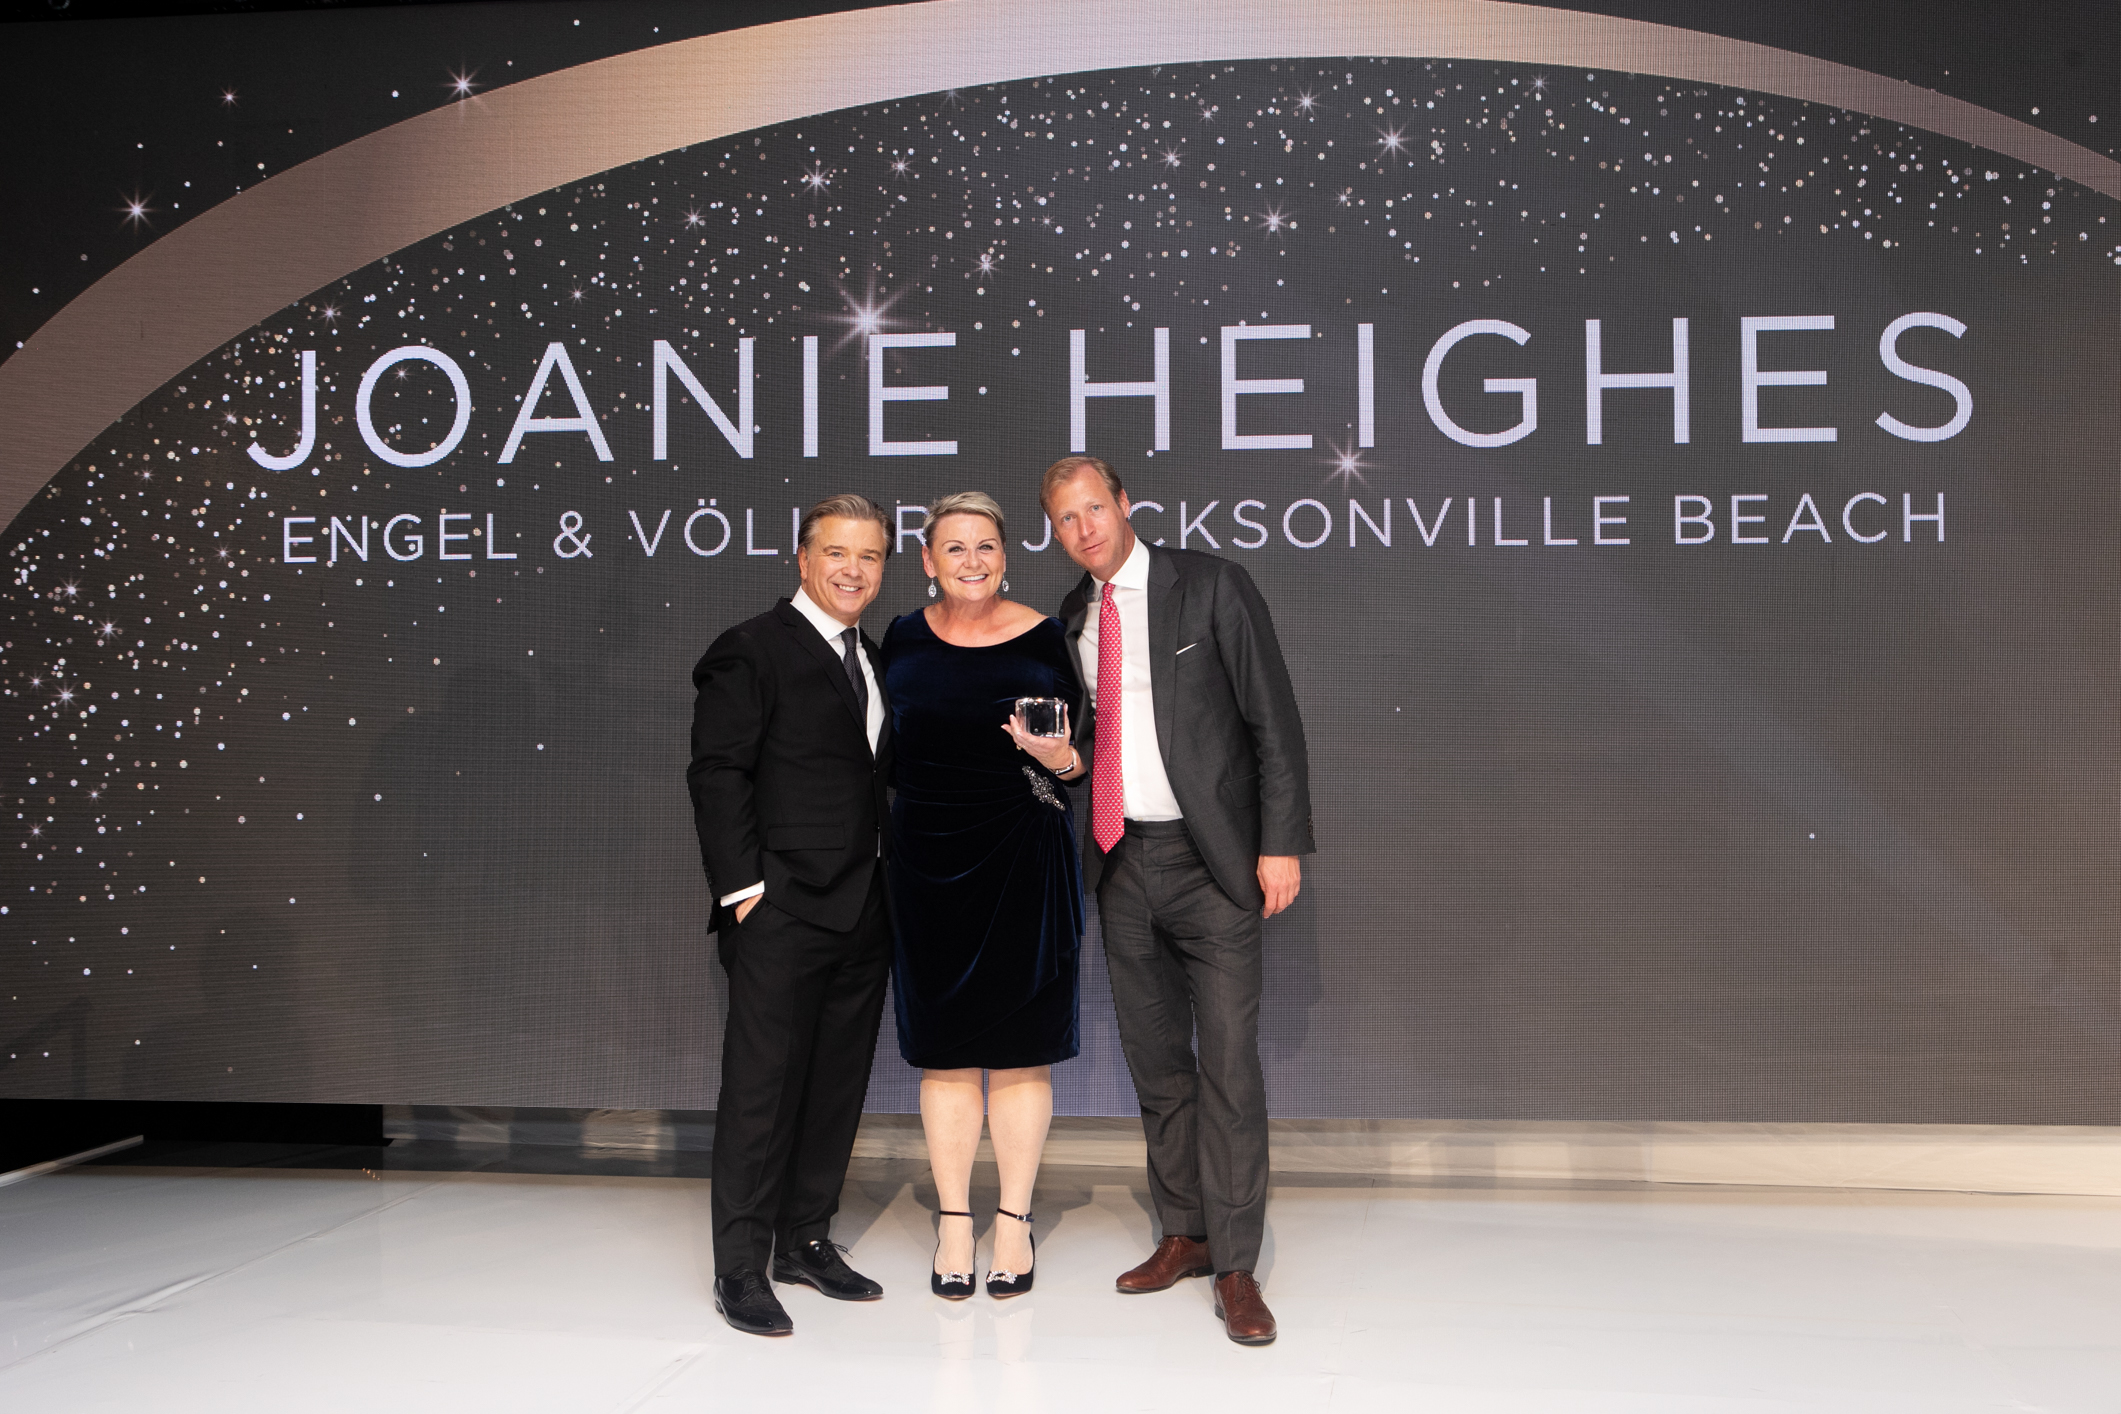 Joanie Heighes of Engel & Völkers Jacksonville Beach awarded  as one of the Top 25 Advisors by sides.